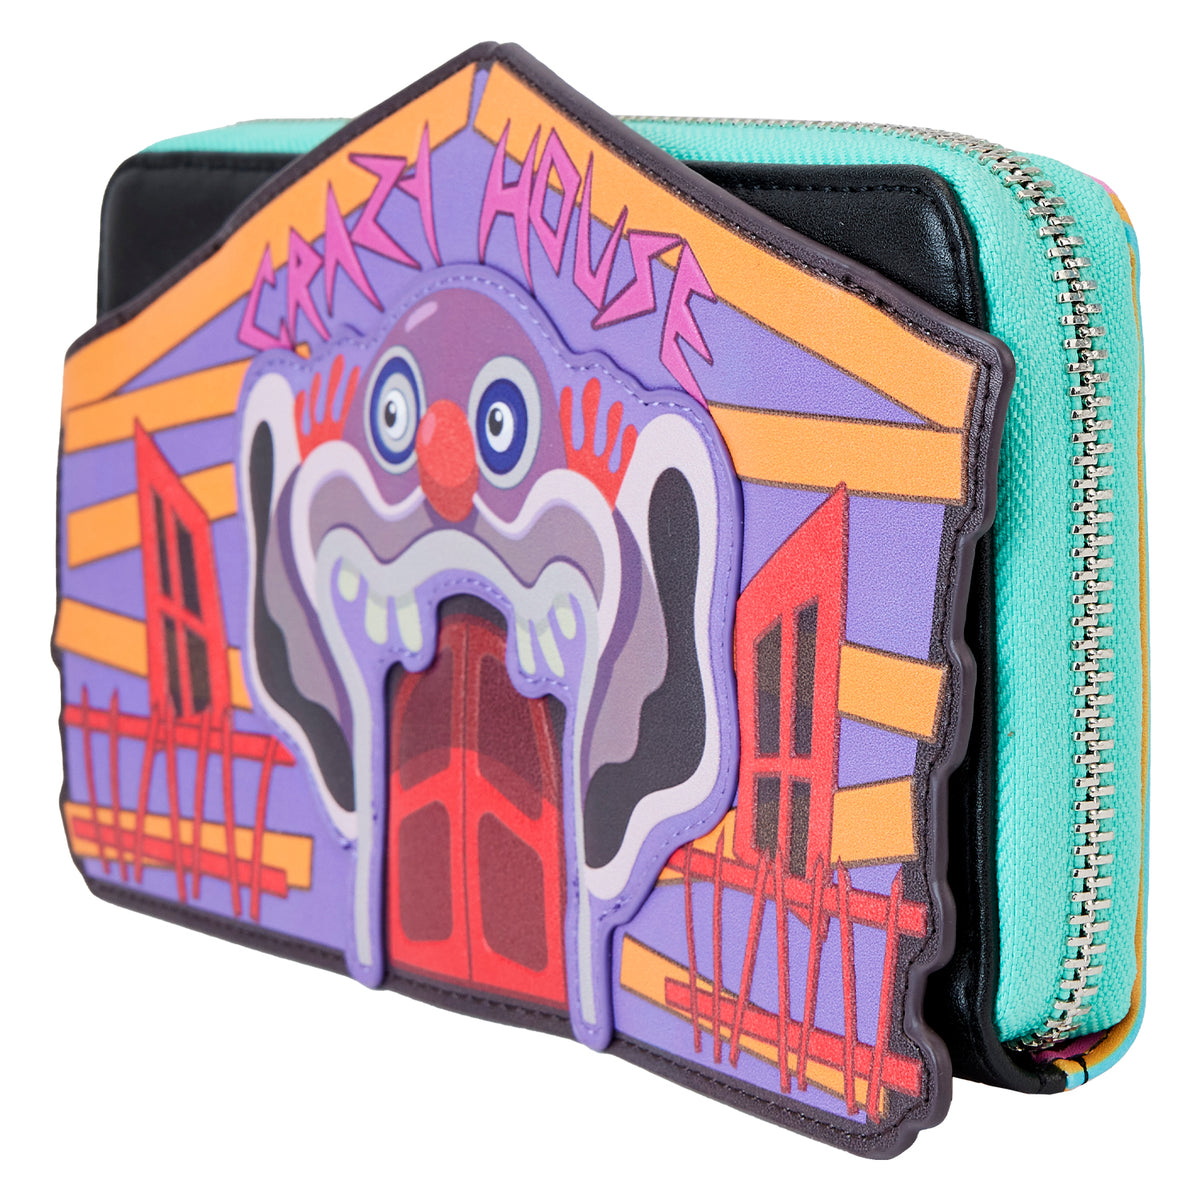 Killer Klowns from Outer Space Loungefly Zip-Around Glowing Wristlet Wallet